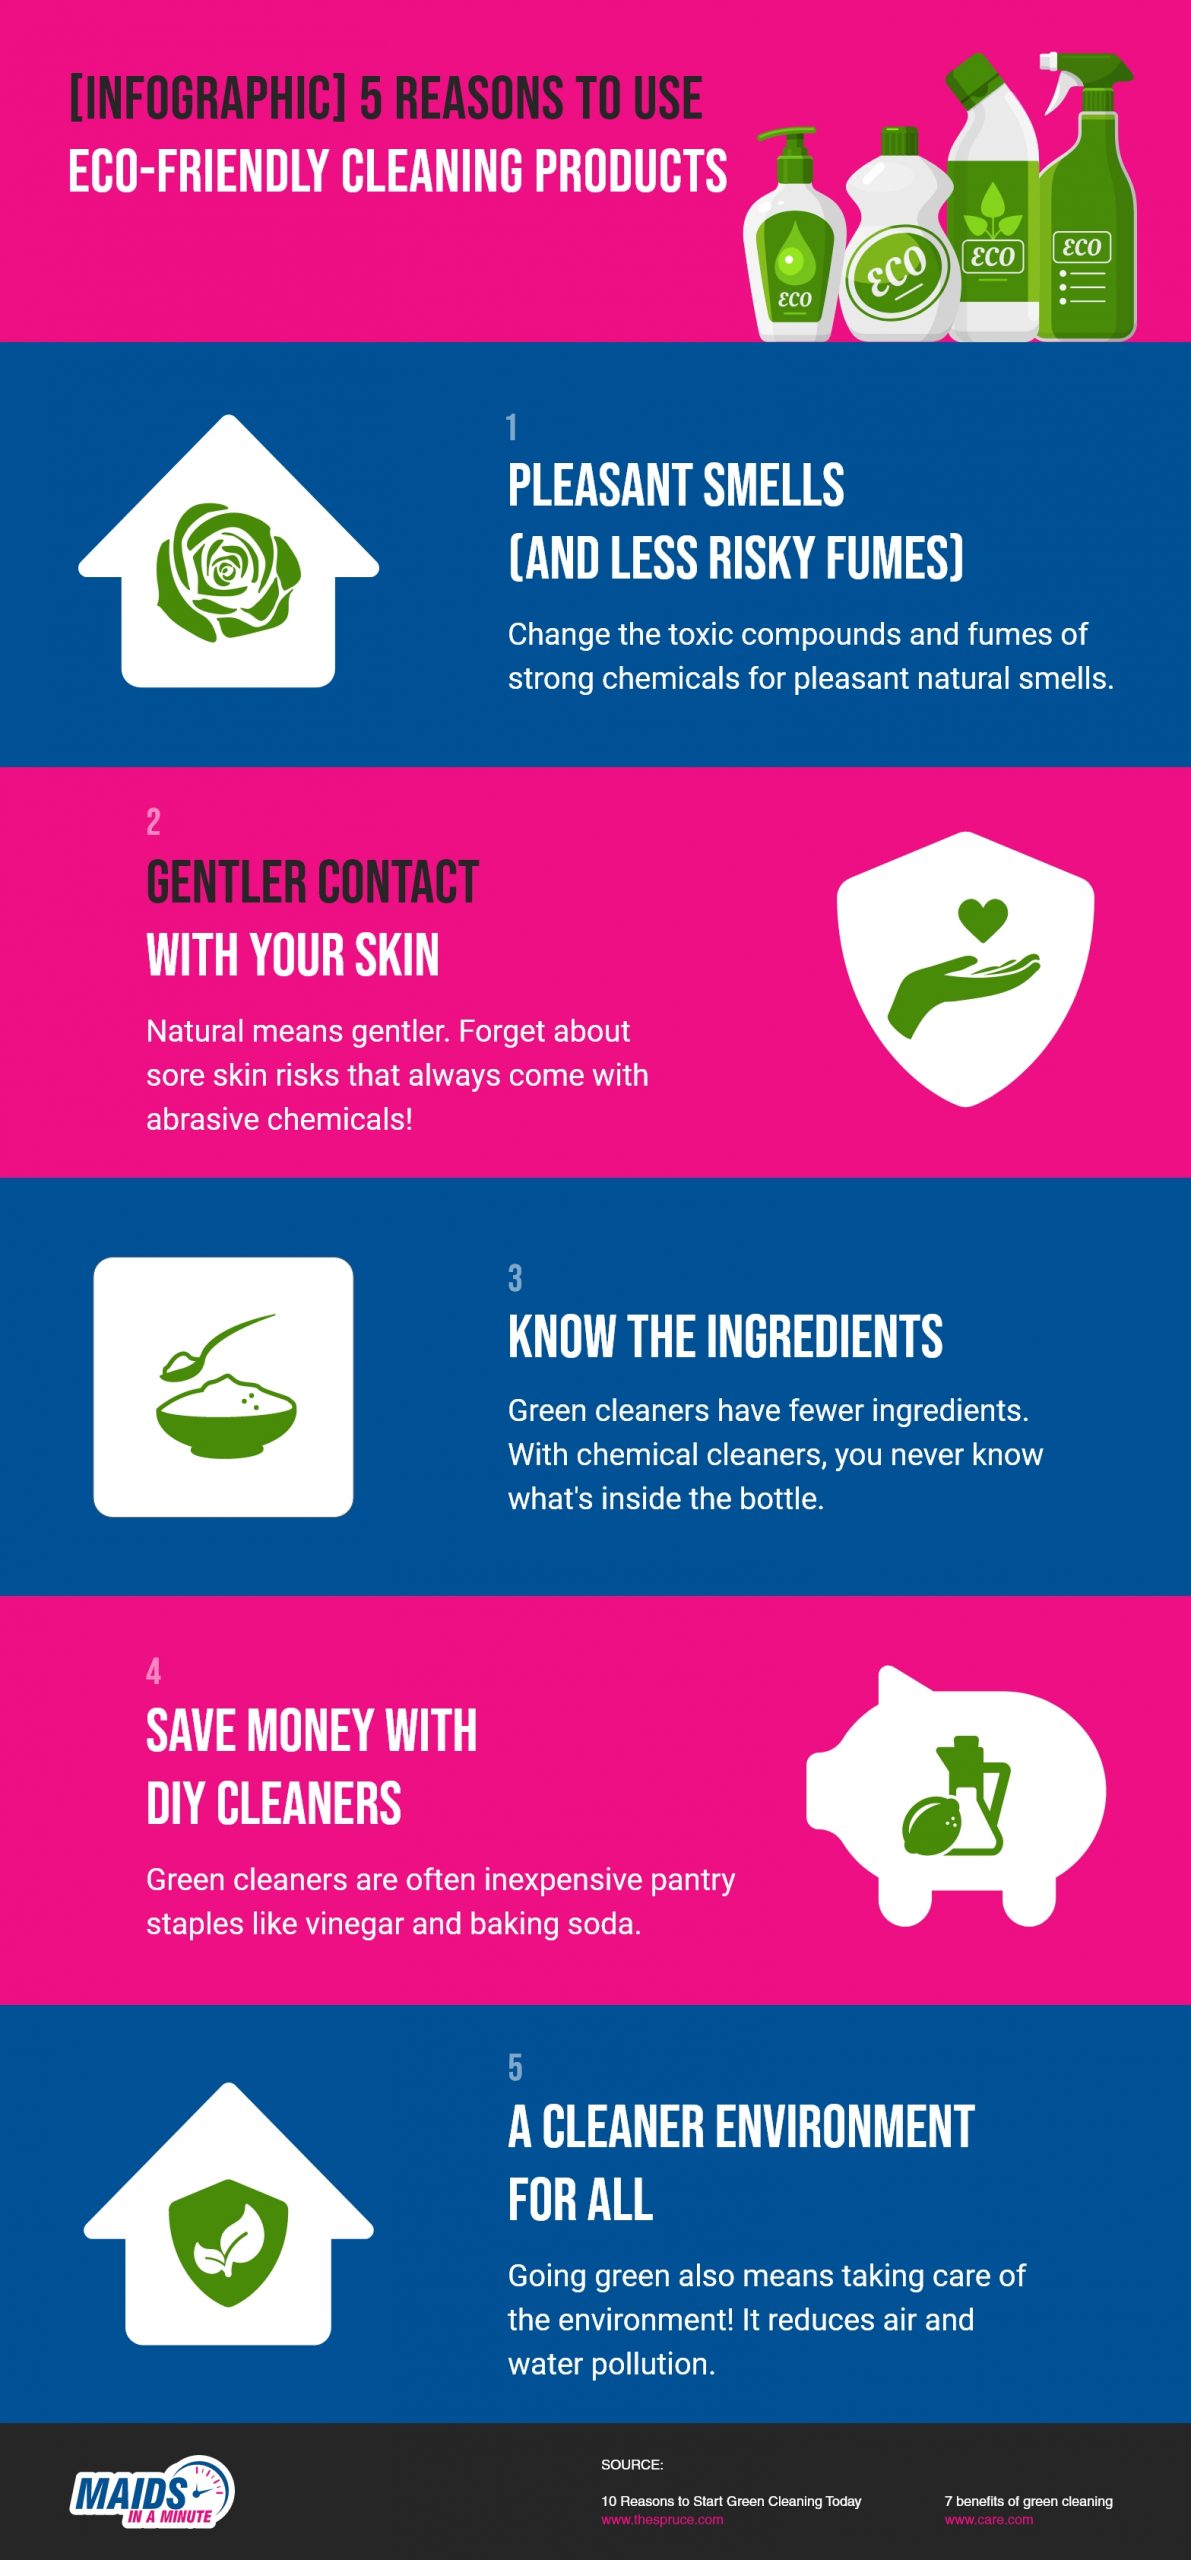 http://www.maidsinaminute.com/wp-content/uploads/2021/07/Maids-In-A-Minute-Infographic-5-Reasons-To-Use-Eco-friendly-Cleaning-Products-scaled.jpg